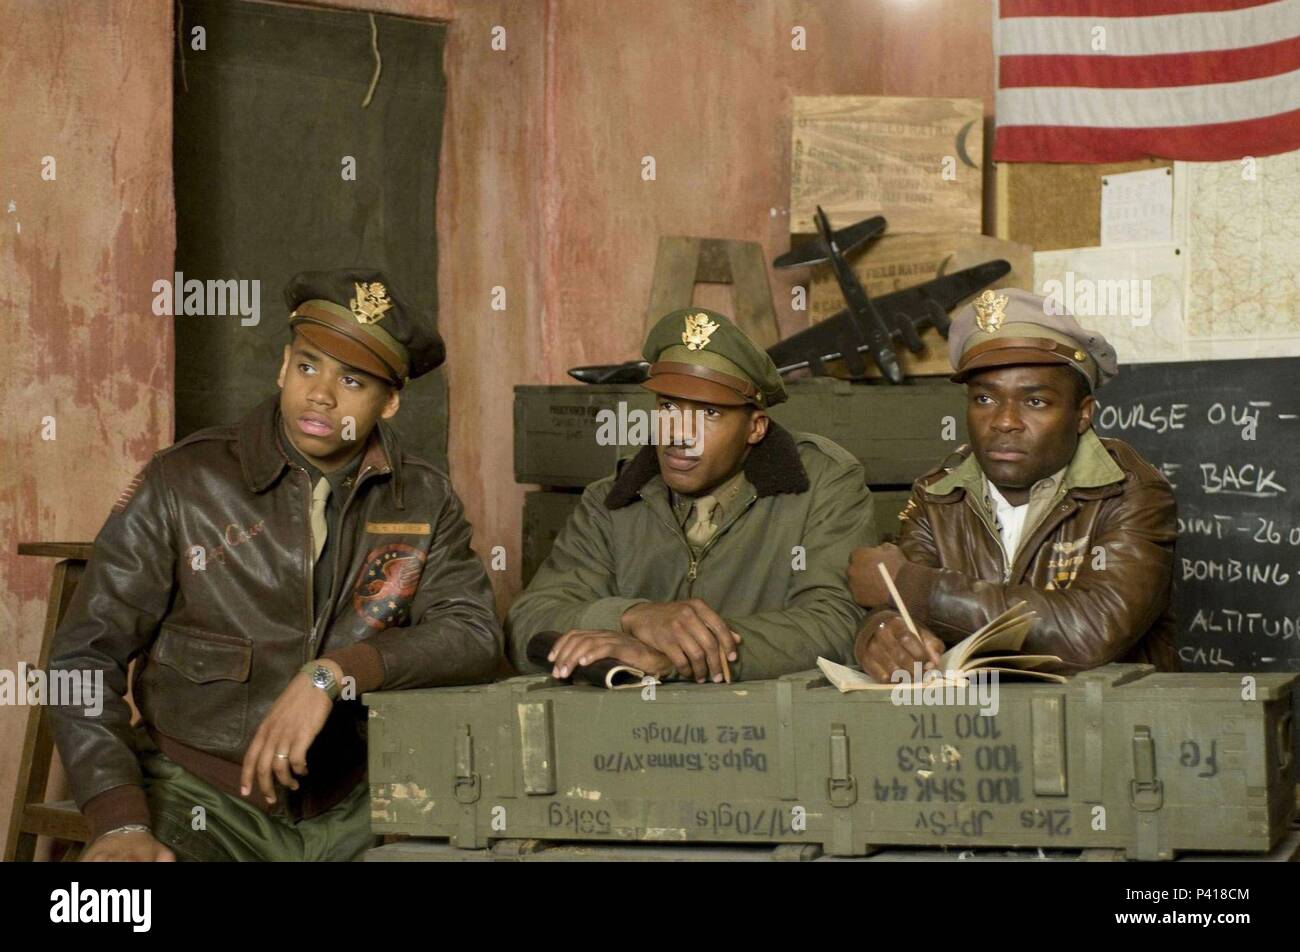 Original Film Title: RED TAILS.  English Title: RED TAILS.  Film Director: ANTHONY HEMINGWAY.  Year: 2012.  Stars: DAVID OYELOWO; NATE PARKER; TRISTAN WILDS. Credit: 20TH CENTURY FOX / Album Stock Photo